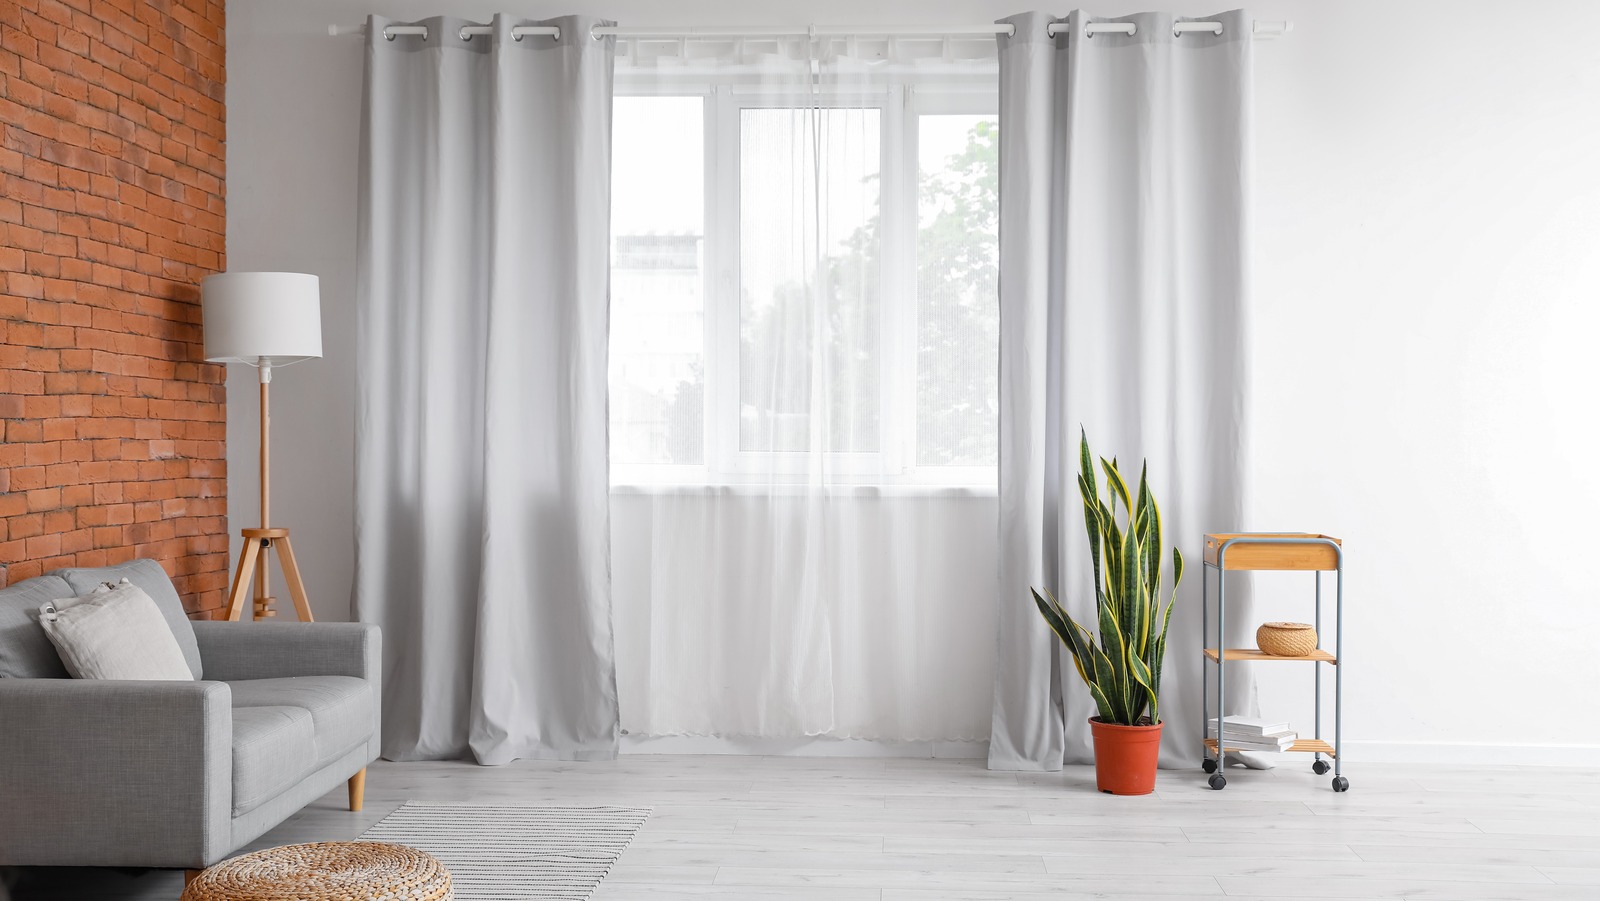 How To Hang Temporary Curtains